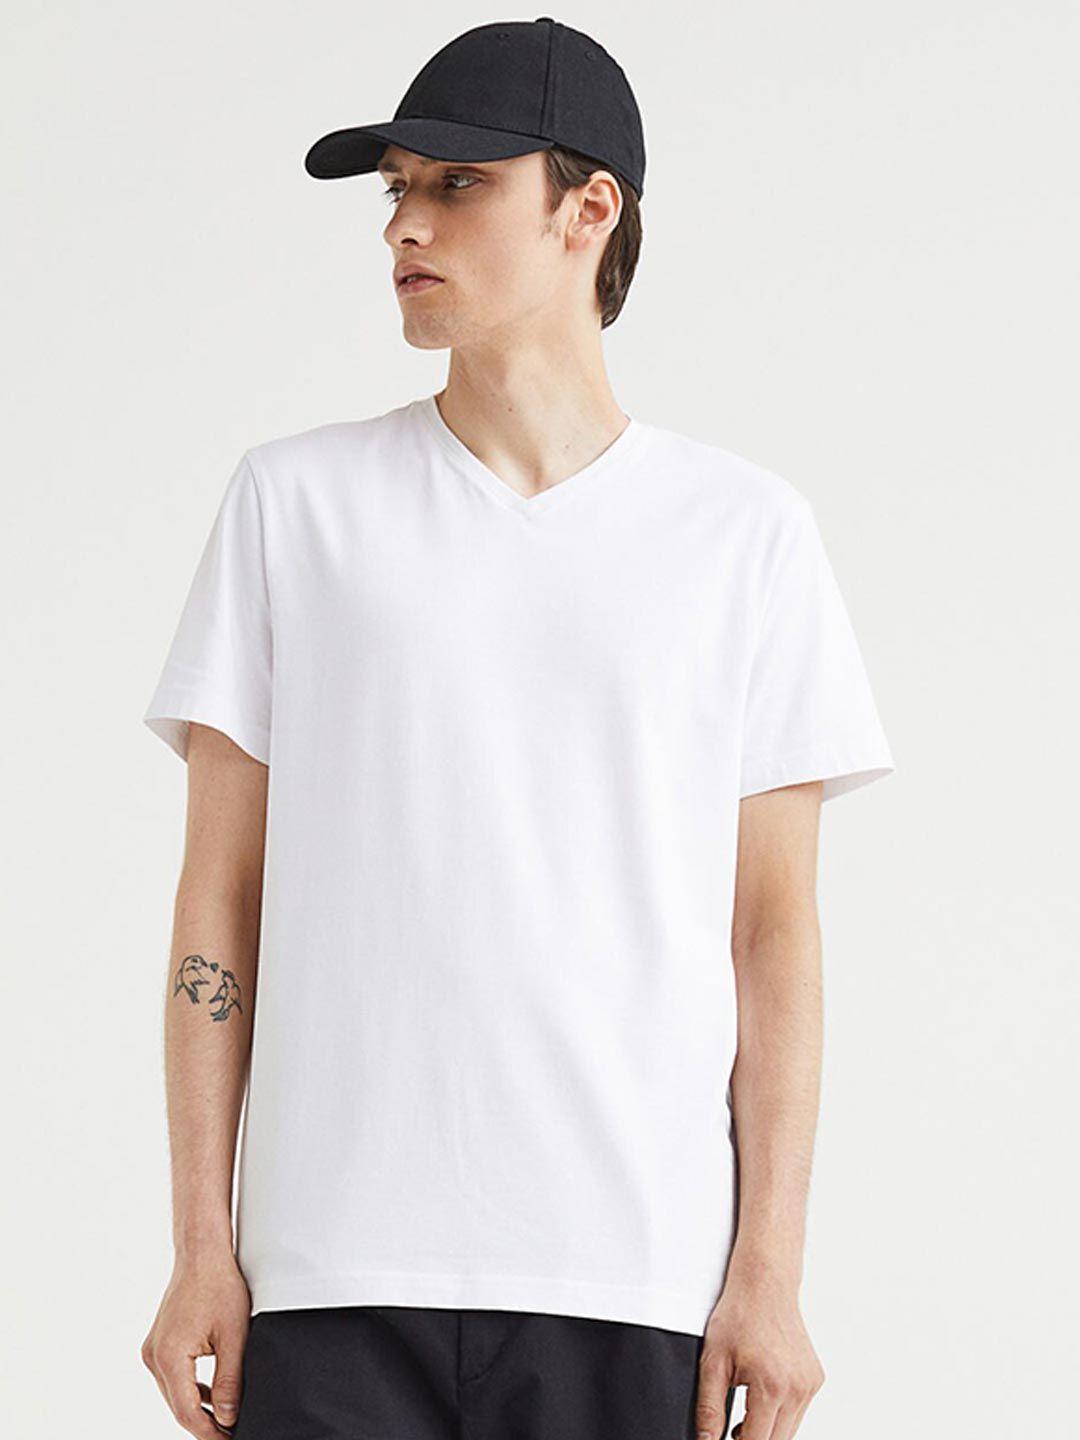 h&m 3 pack slim fit t-shirts